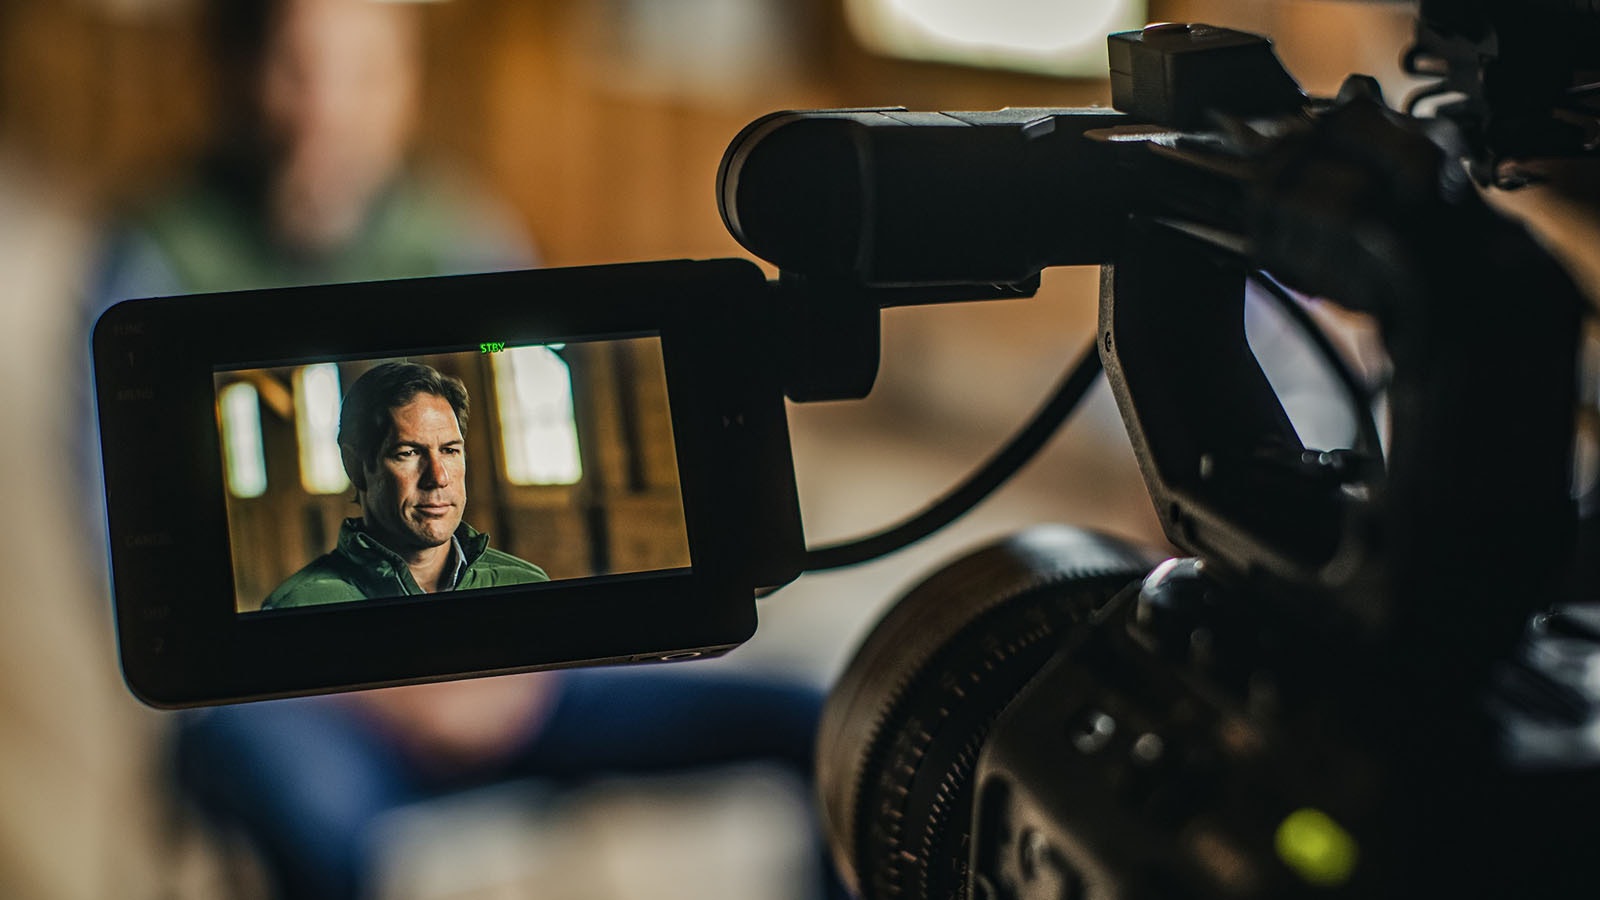 Former NFL linebacker Scott Fujita being interviewed at the Heart Mountain Interpretive Center for the NFL documentary "9066: Fear, Football, and the Theft of Freedom."